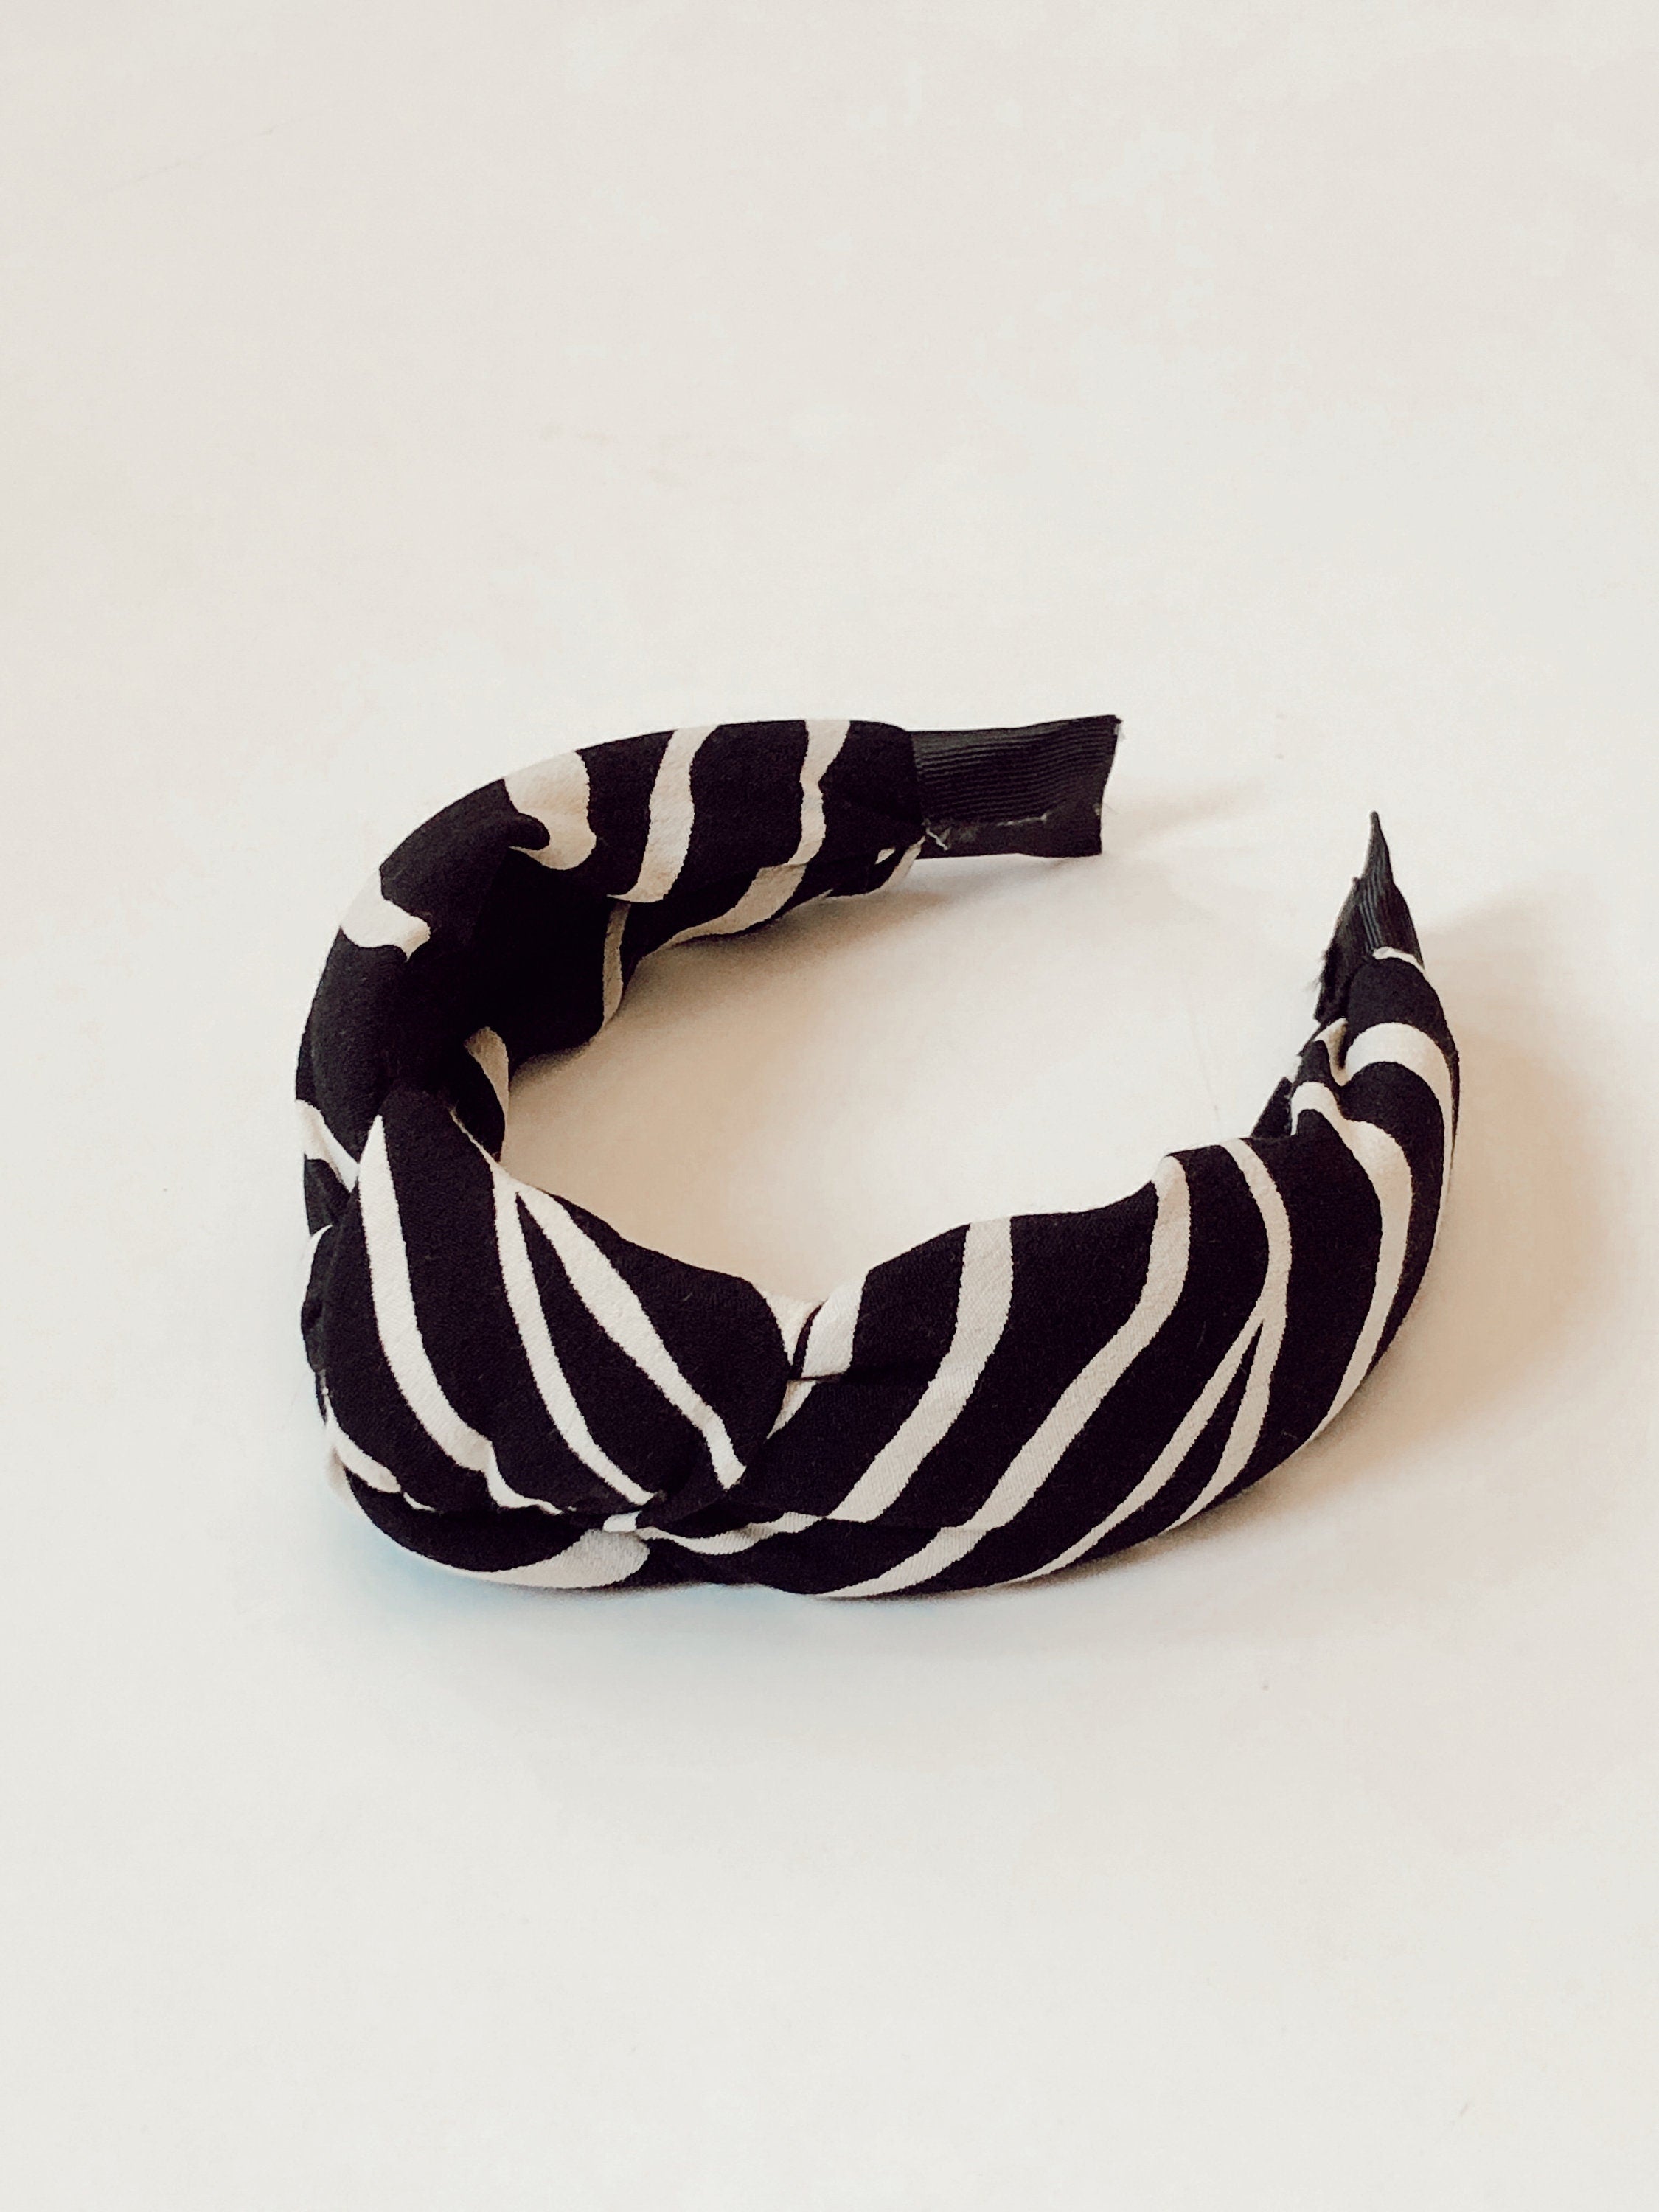 Upgrade her hair game with this must-have knotted headband, designed with a chic zebra pattern.